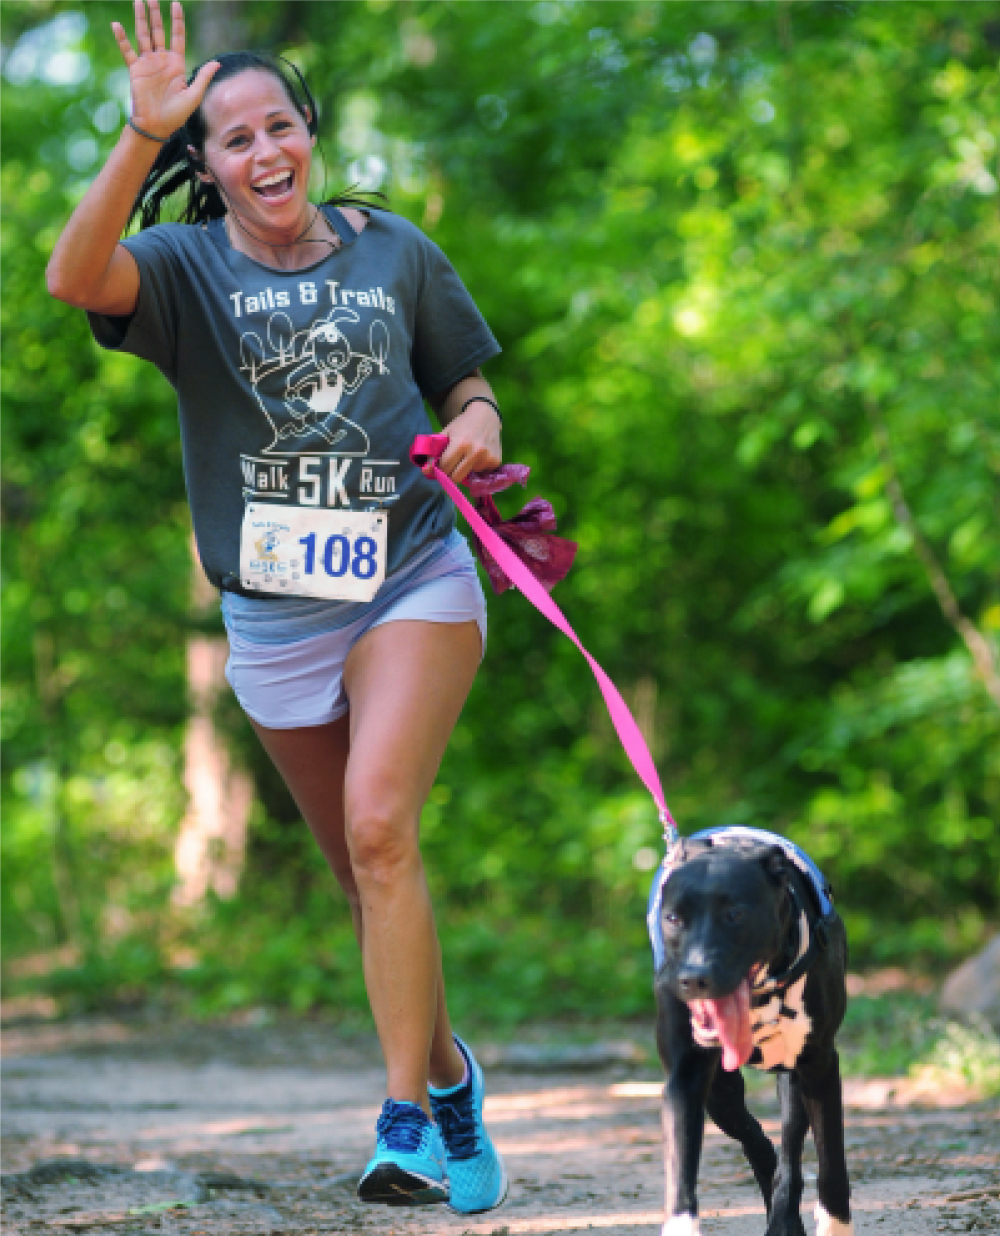 Run with your best running partner - your dog